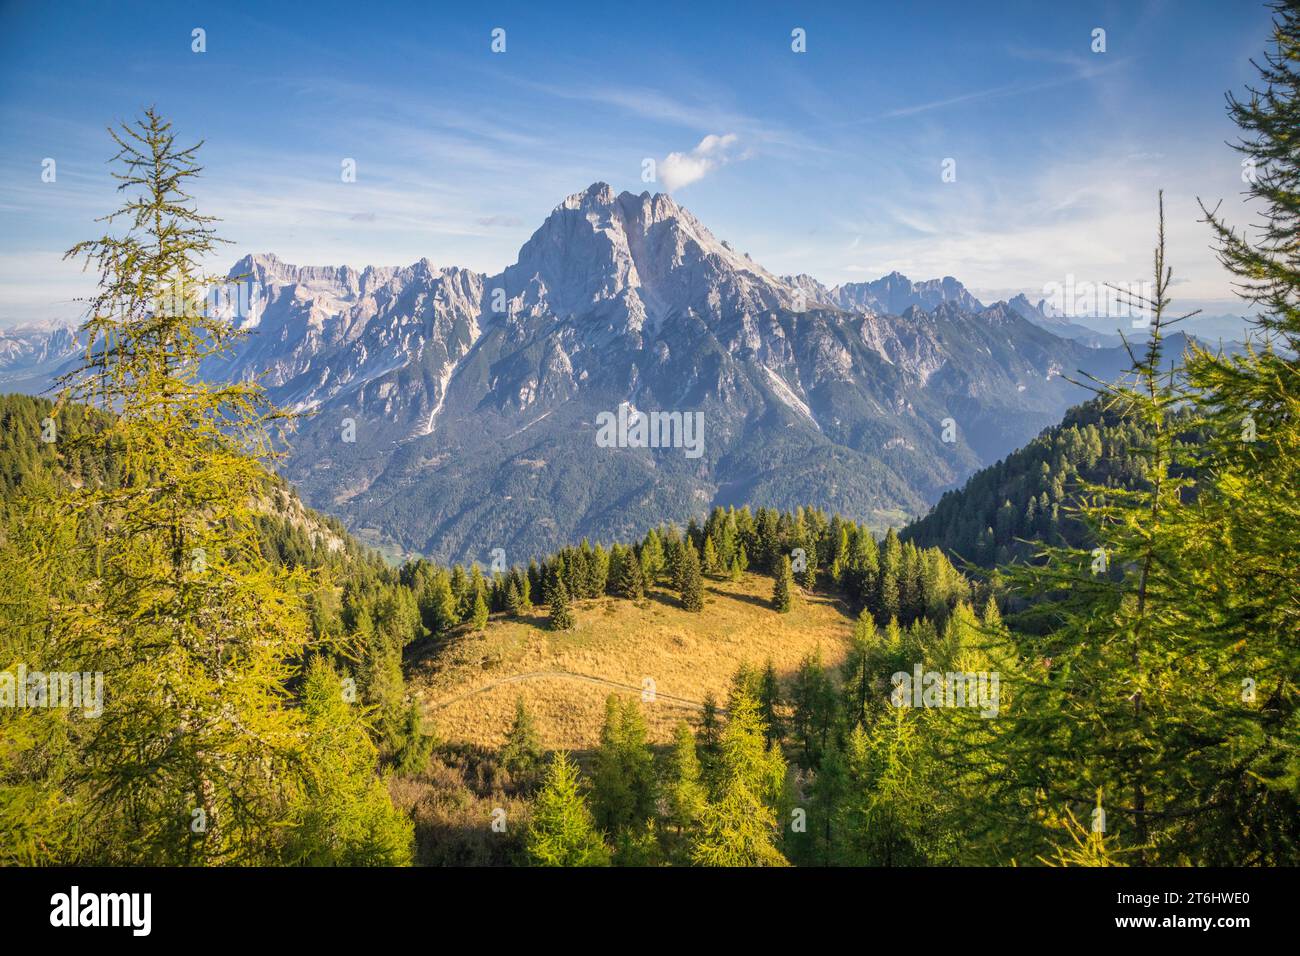 Italy, Veneto, province of Belluno, the Antelao mountain seen from the top of Mount Rite, Dolomites Stock Photo